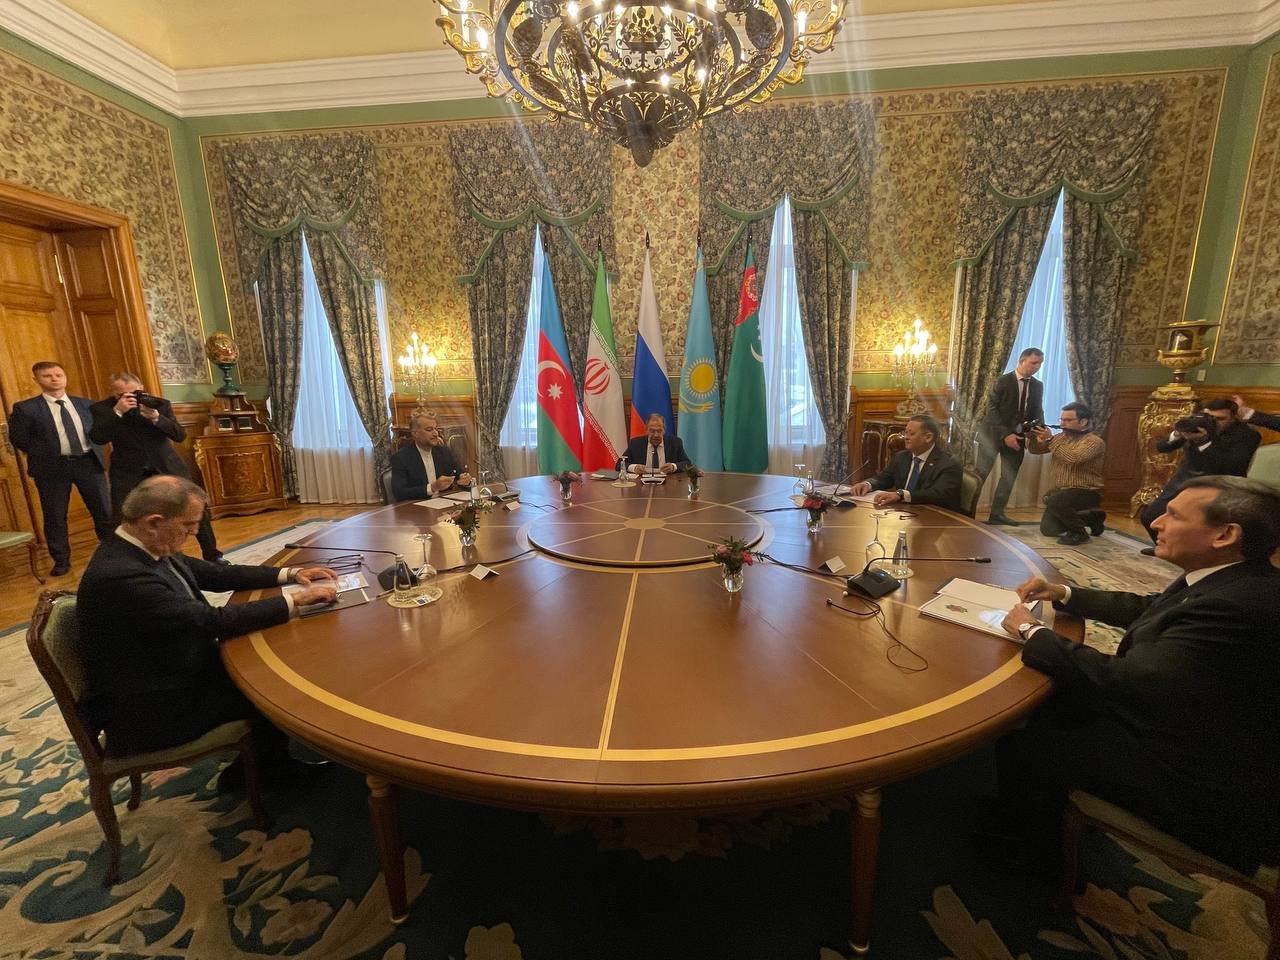 Meeting of foreign ministers of Caspian states taking place in Moscow